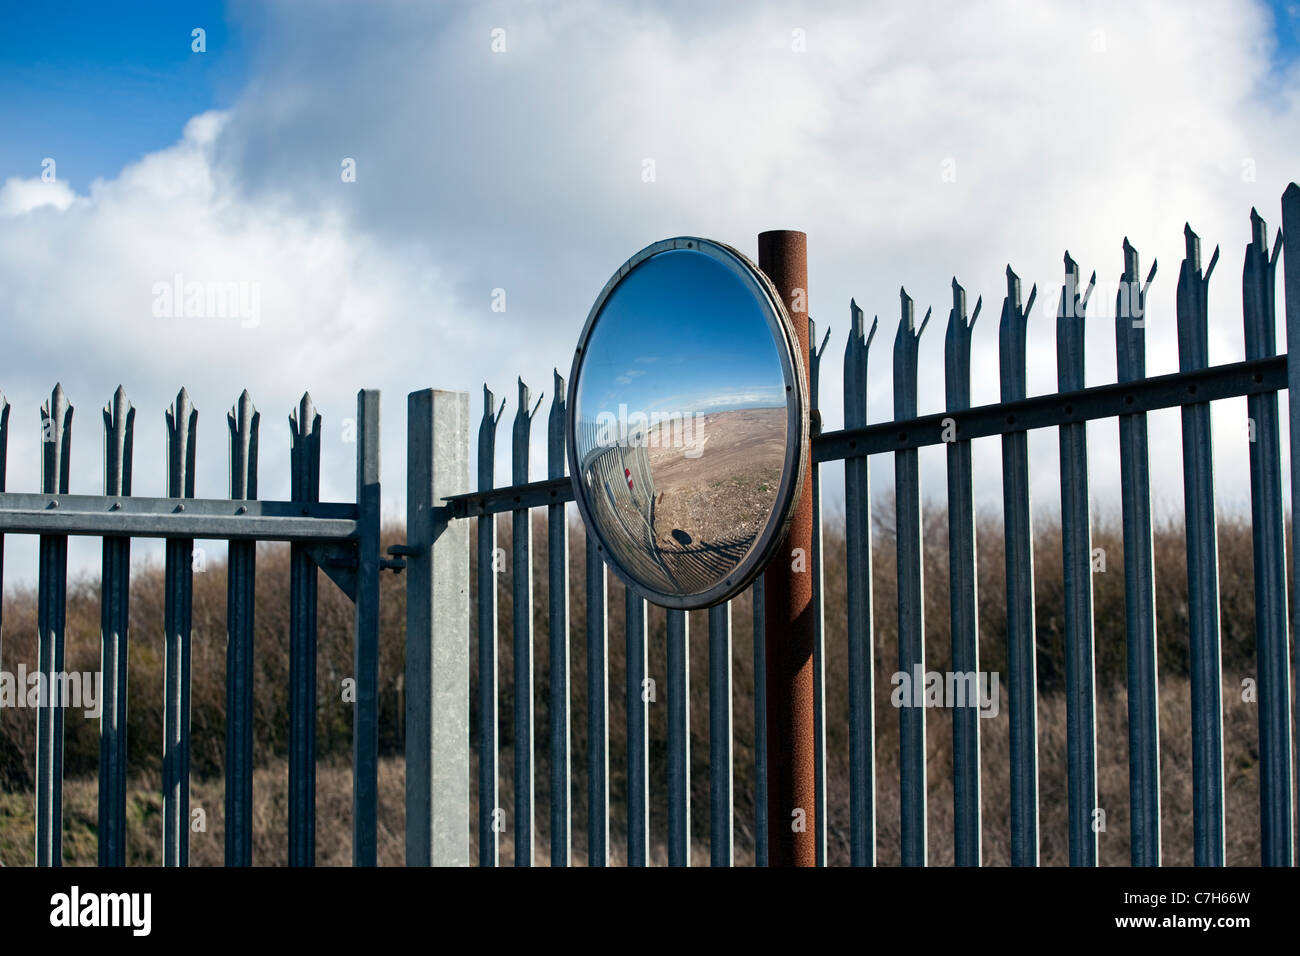 A concave mirror on a metal perimeter fence reflects a disused factory site in Workington, Cumbria, England. Stock Photo